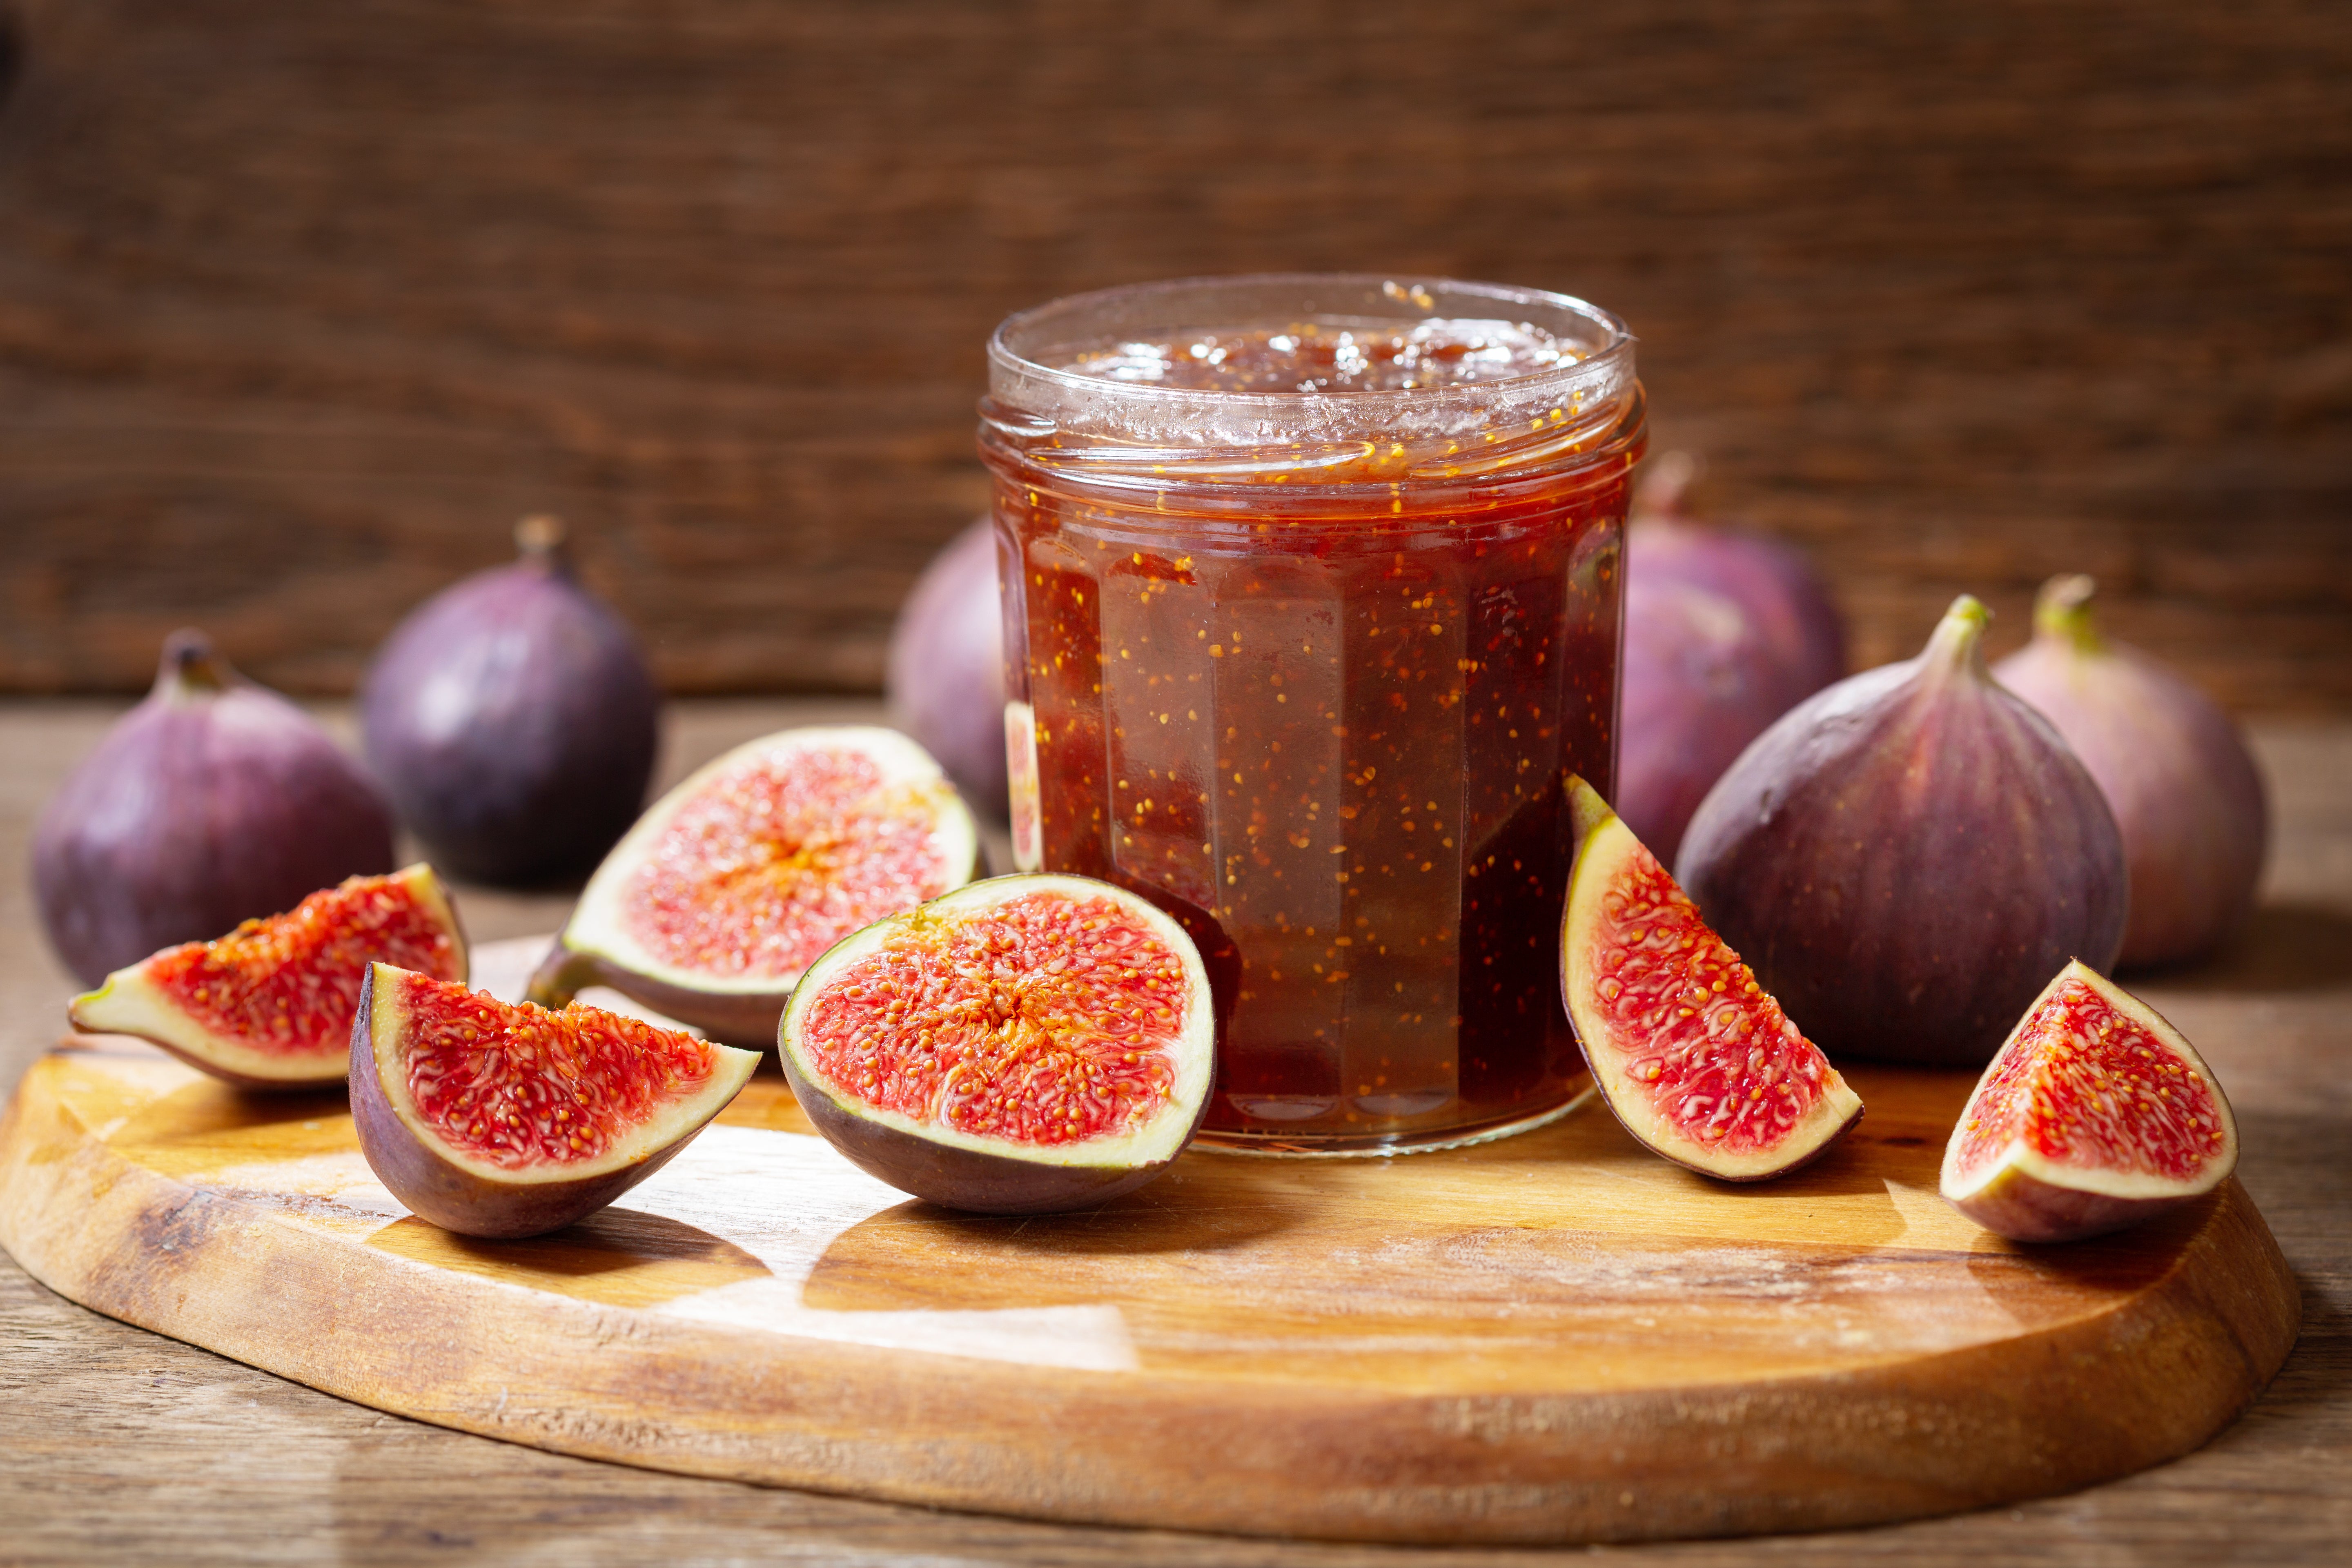 A classic gentle simmer suits the figs in this jam well